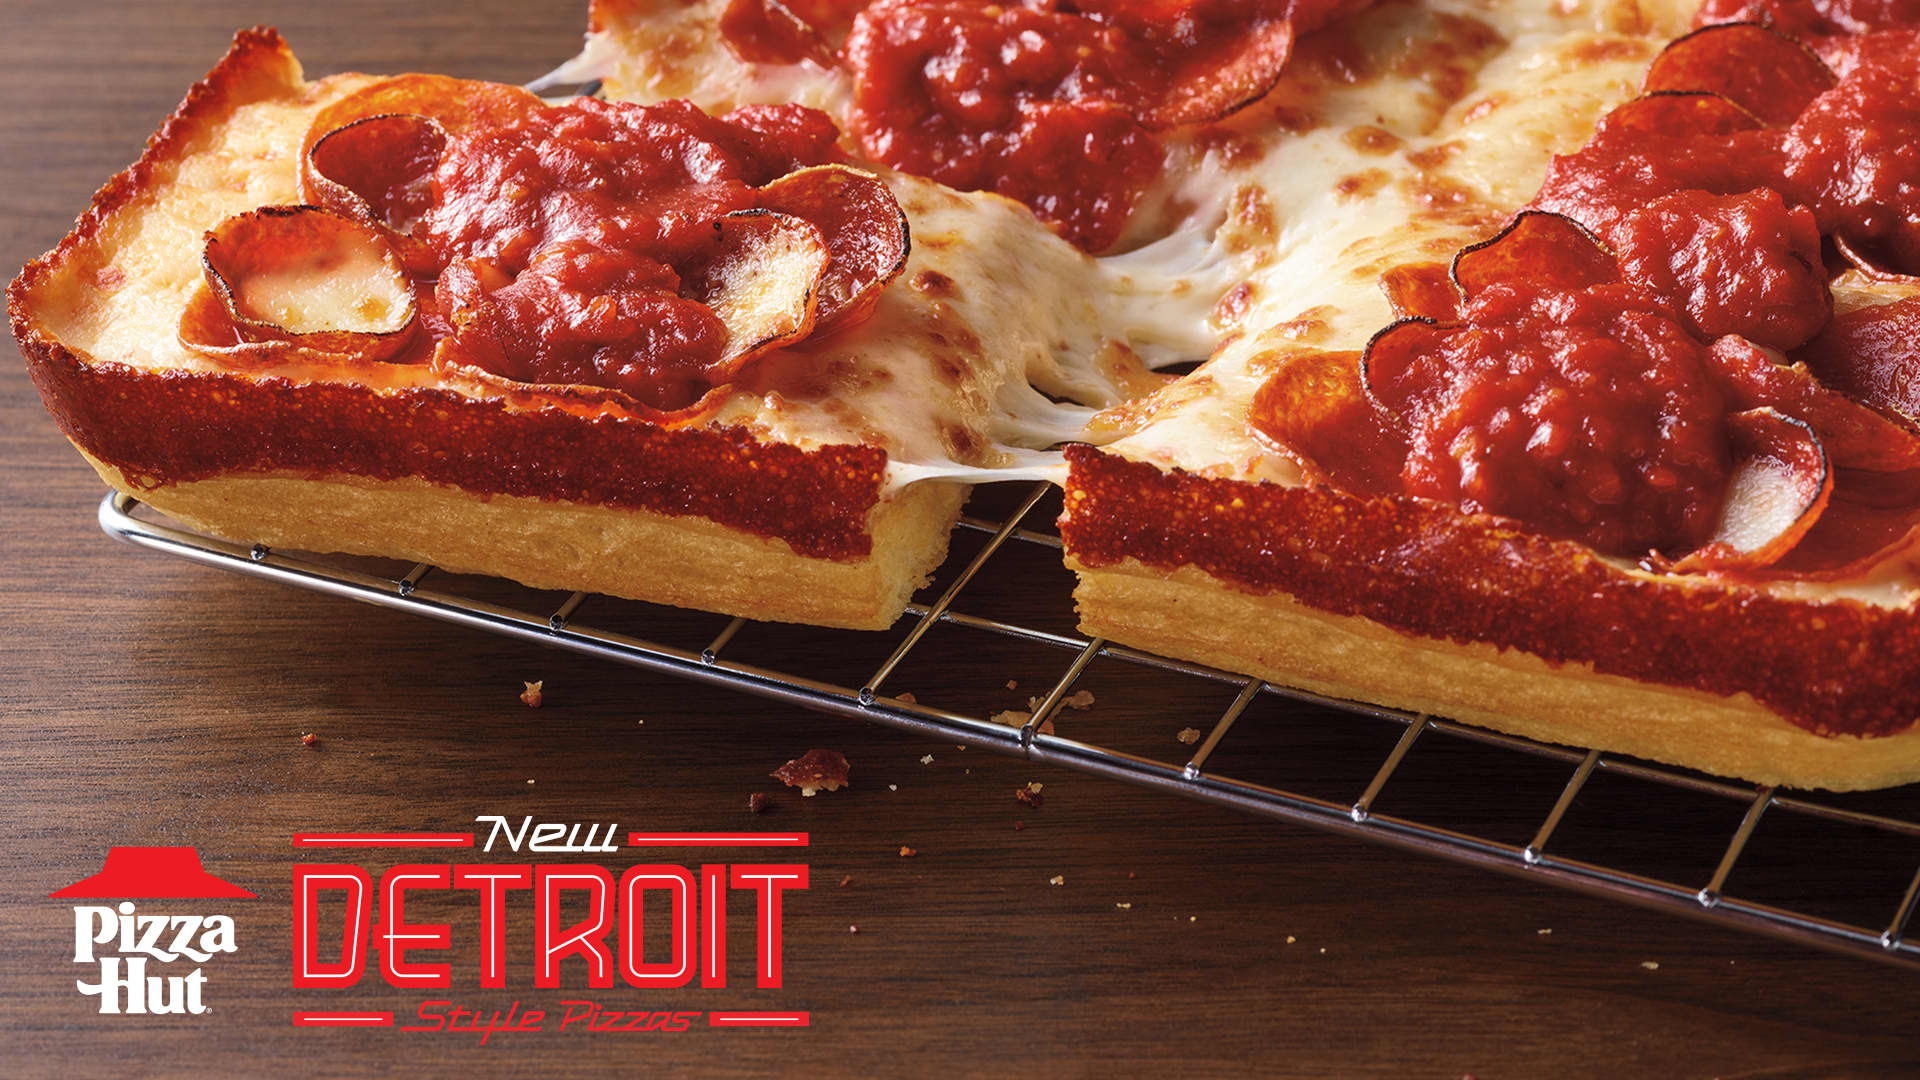 Pizza Hut will launch Detroit-style pizza as its change continues